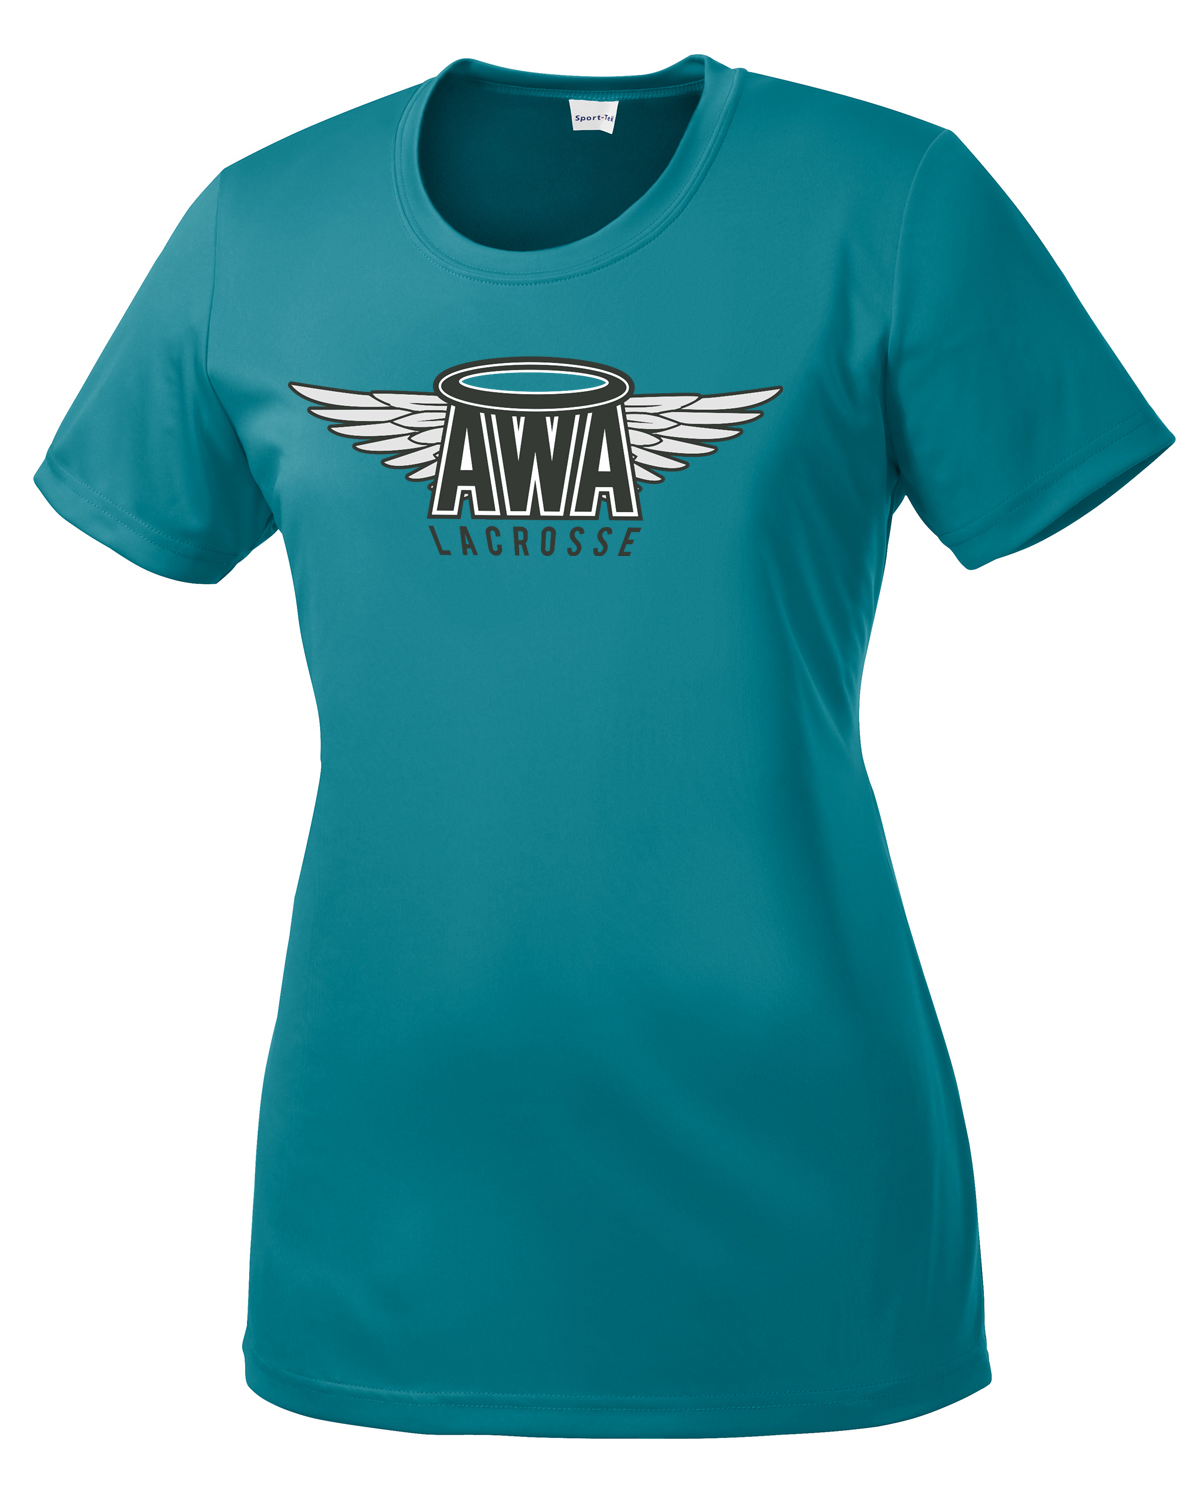 Angels With Attitude Women's Performance Tee